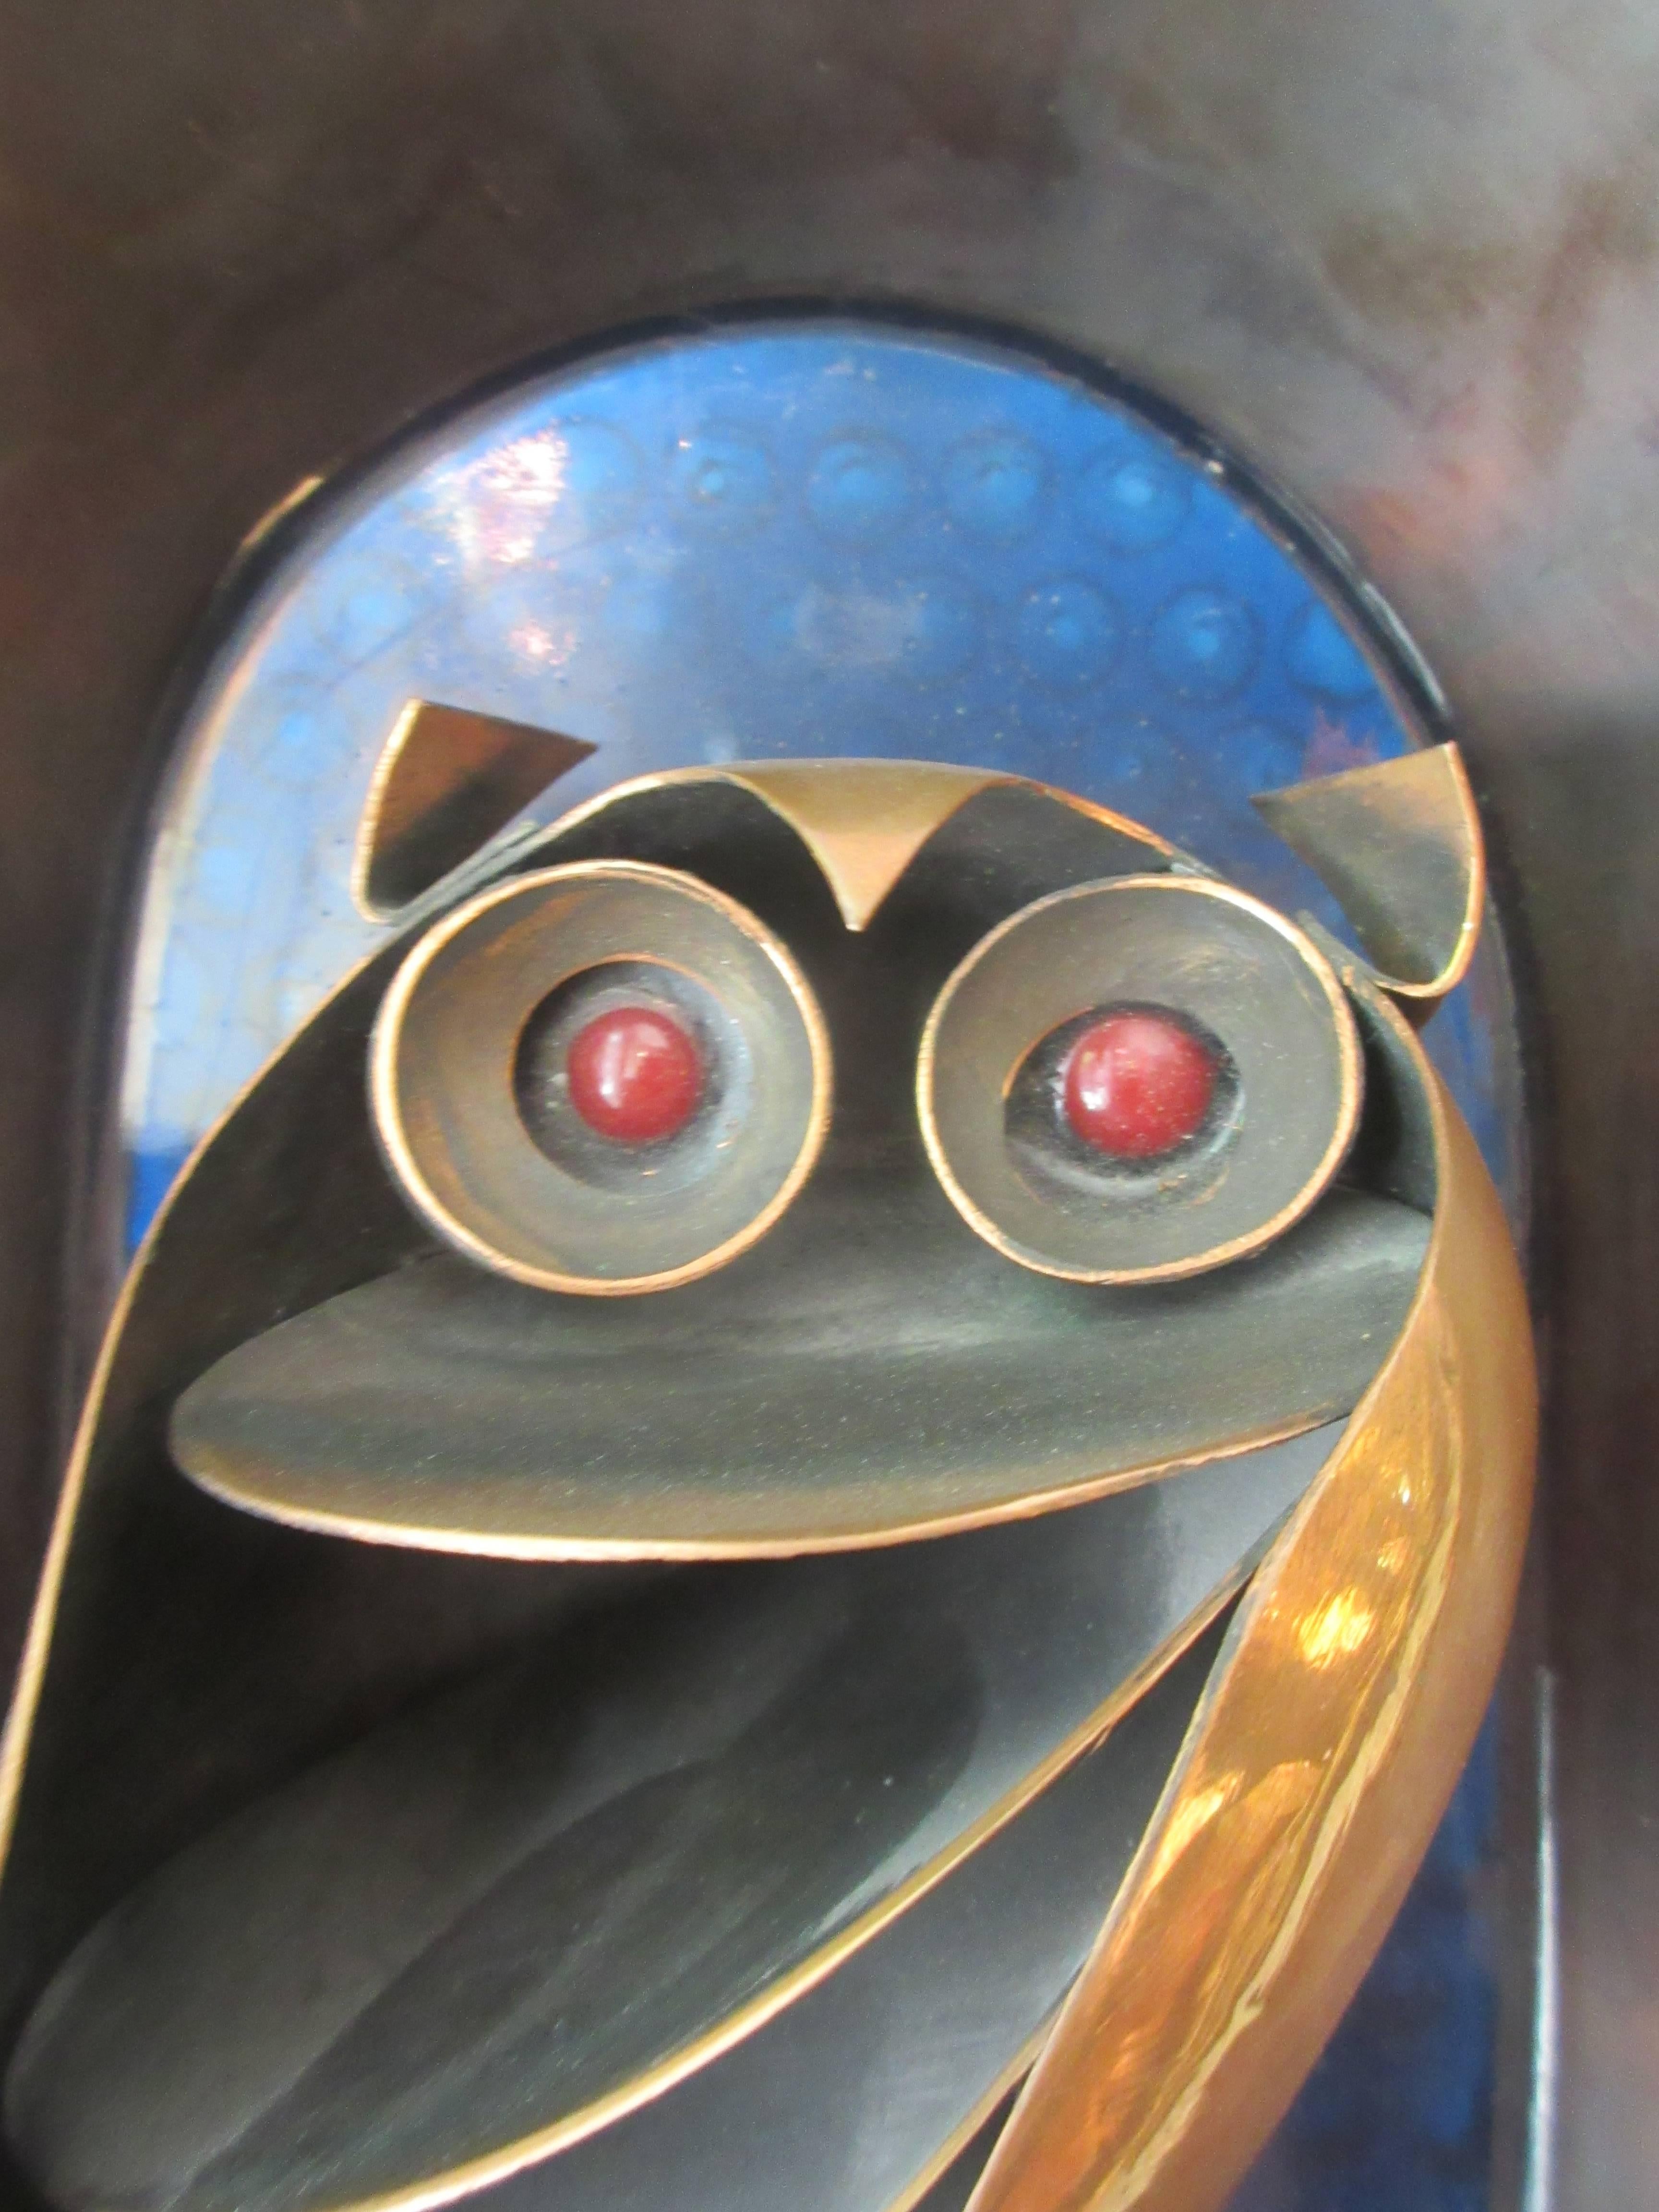 Signed Bolba copper sculpture of and owl framed in an arch and backed with a blue resin giving the impression of stained glass. The work is reminiscent of the work of Francisco Rebajas. Done in the 1950s in Hungry (the H after the Bolba name) Some